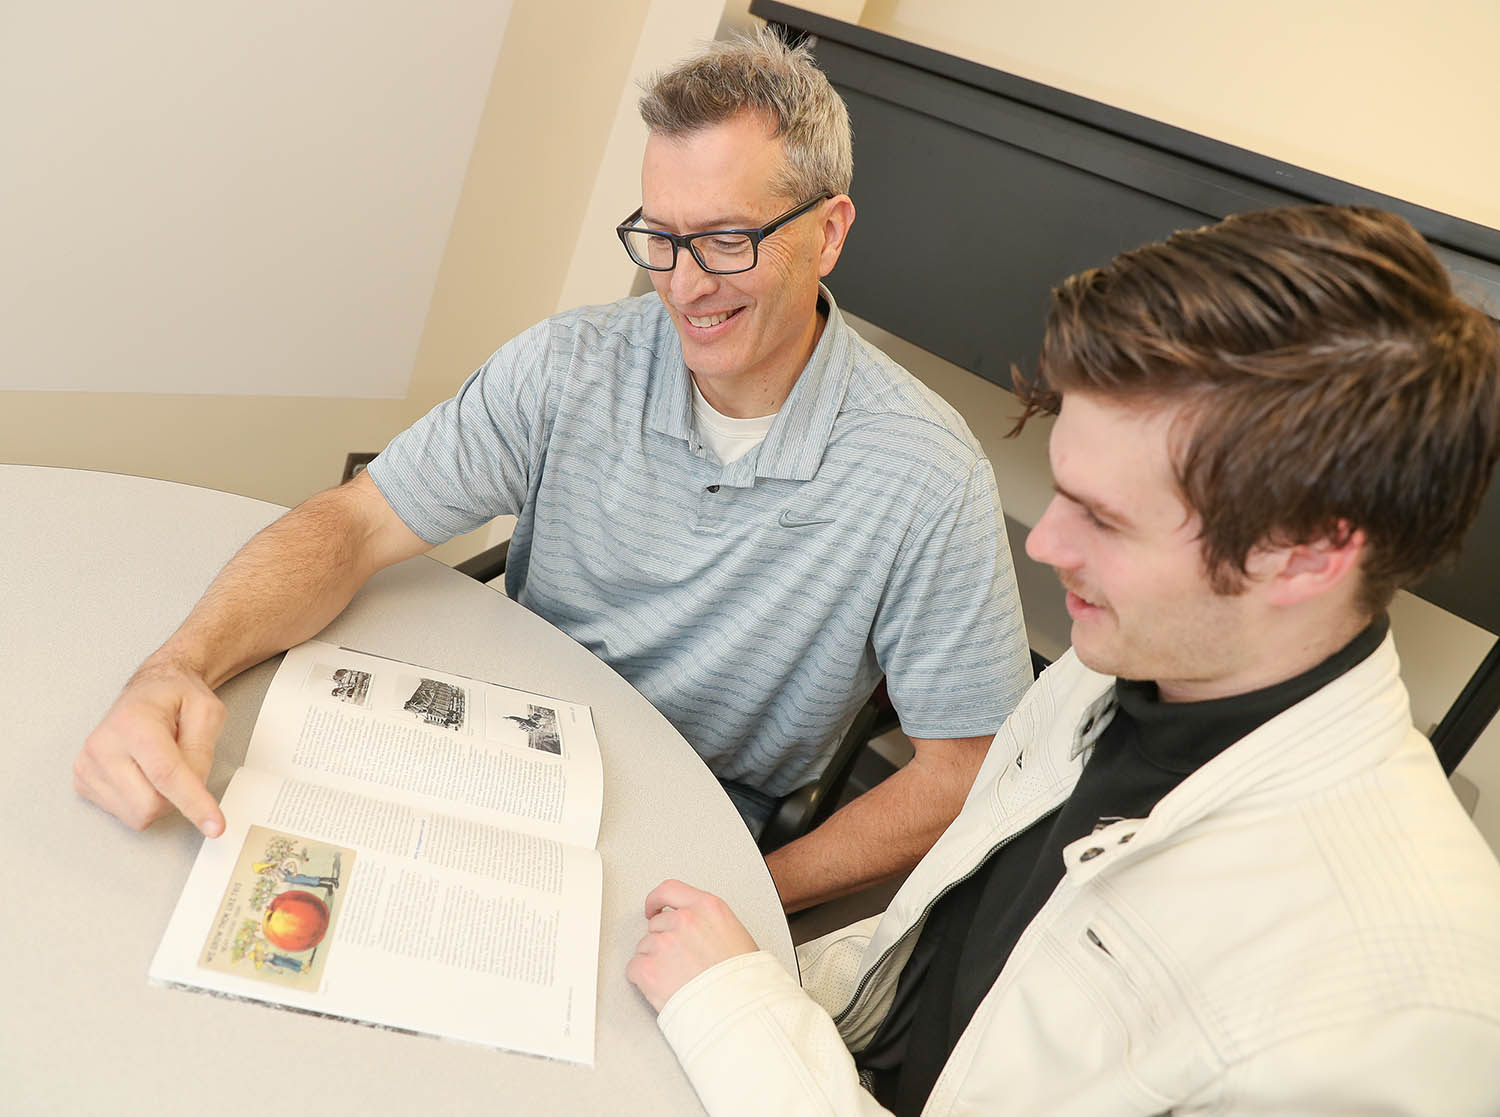 UNK geography professor Jason Combs, left, and his son Tate, a junior at UNK, worked together on a research project studying Nebraska’s “exaggeration postcards.” Their project is featured in the Winter 2019 edition of Nebraska History Magazine. (Photo by Corbey R. Dorsey, UNK Communications)